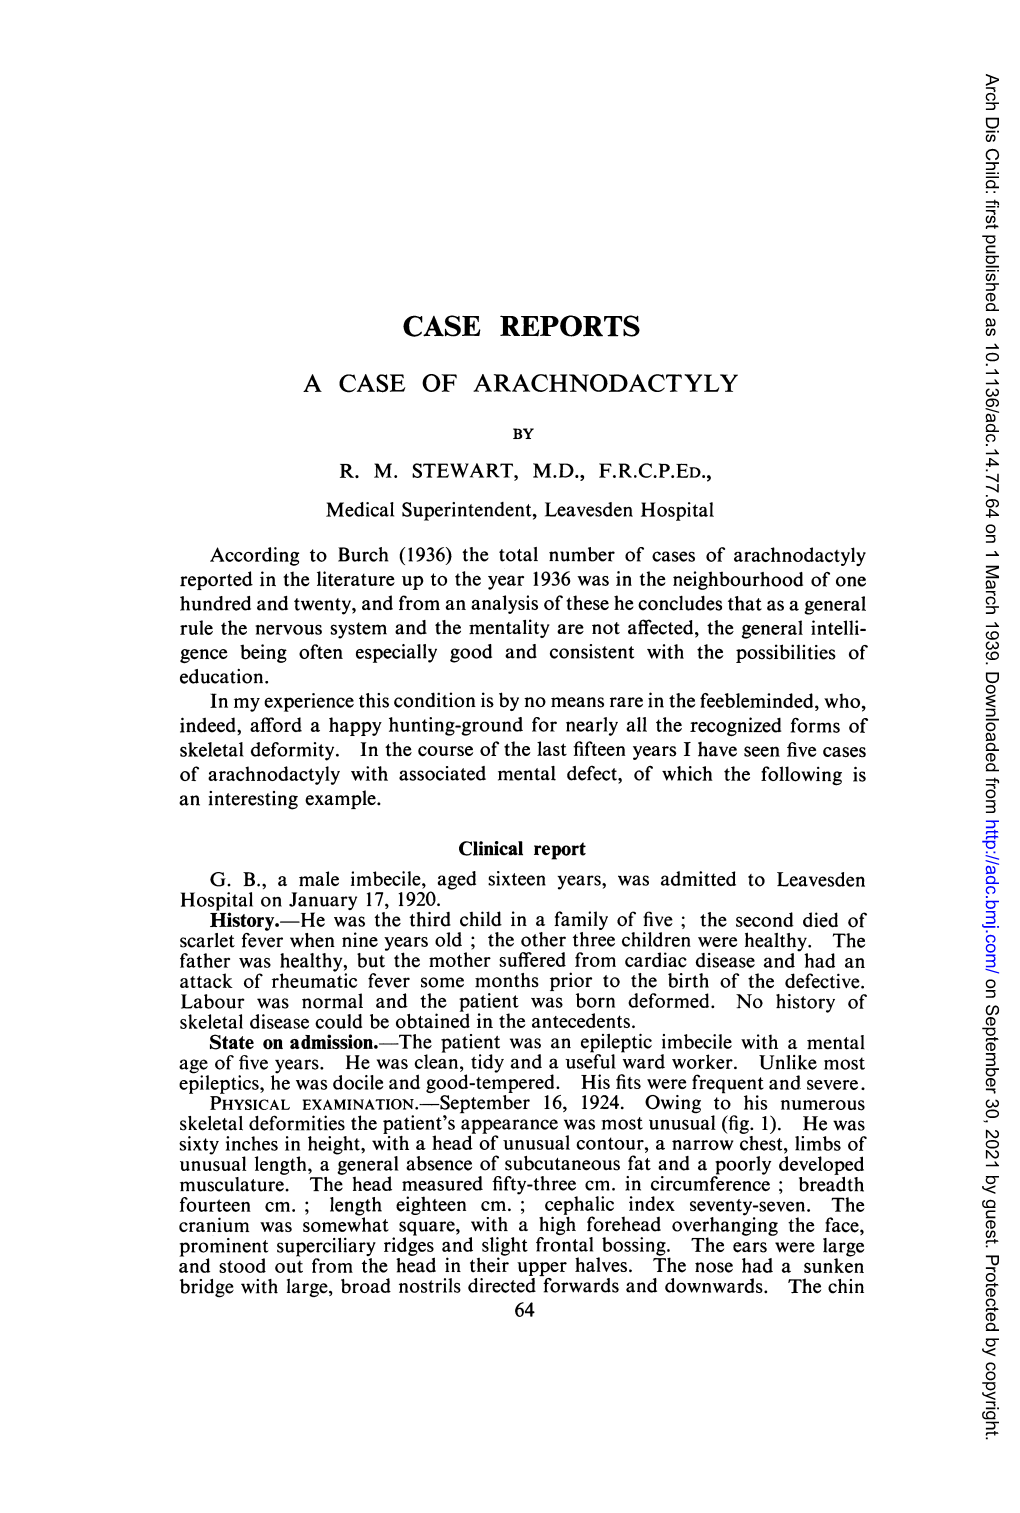 Case Reports a Case of Arachnodactyly